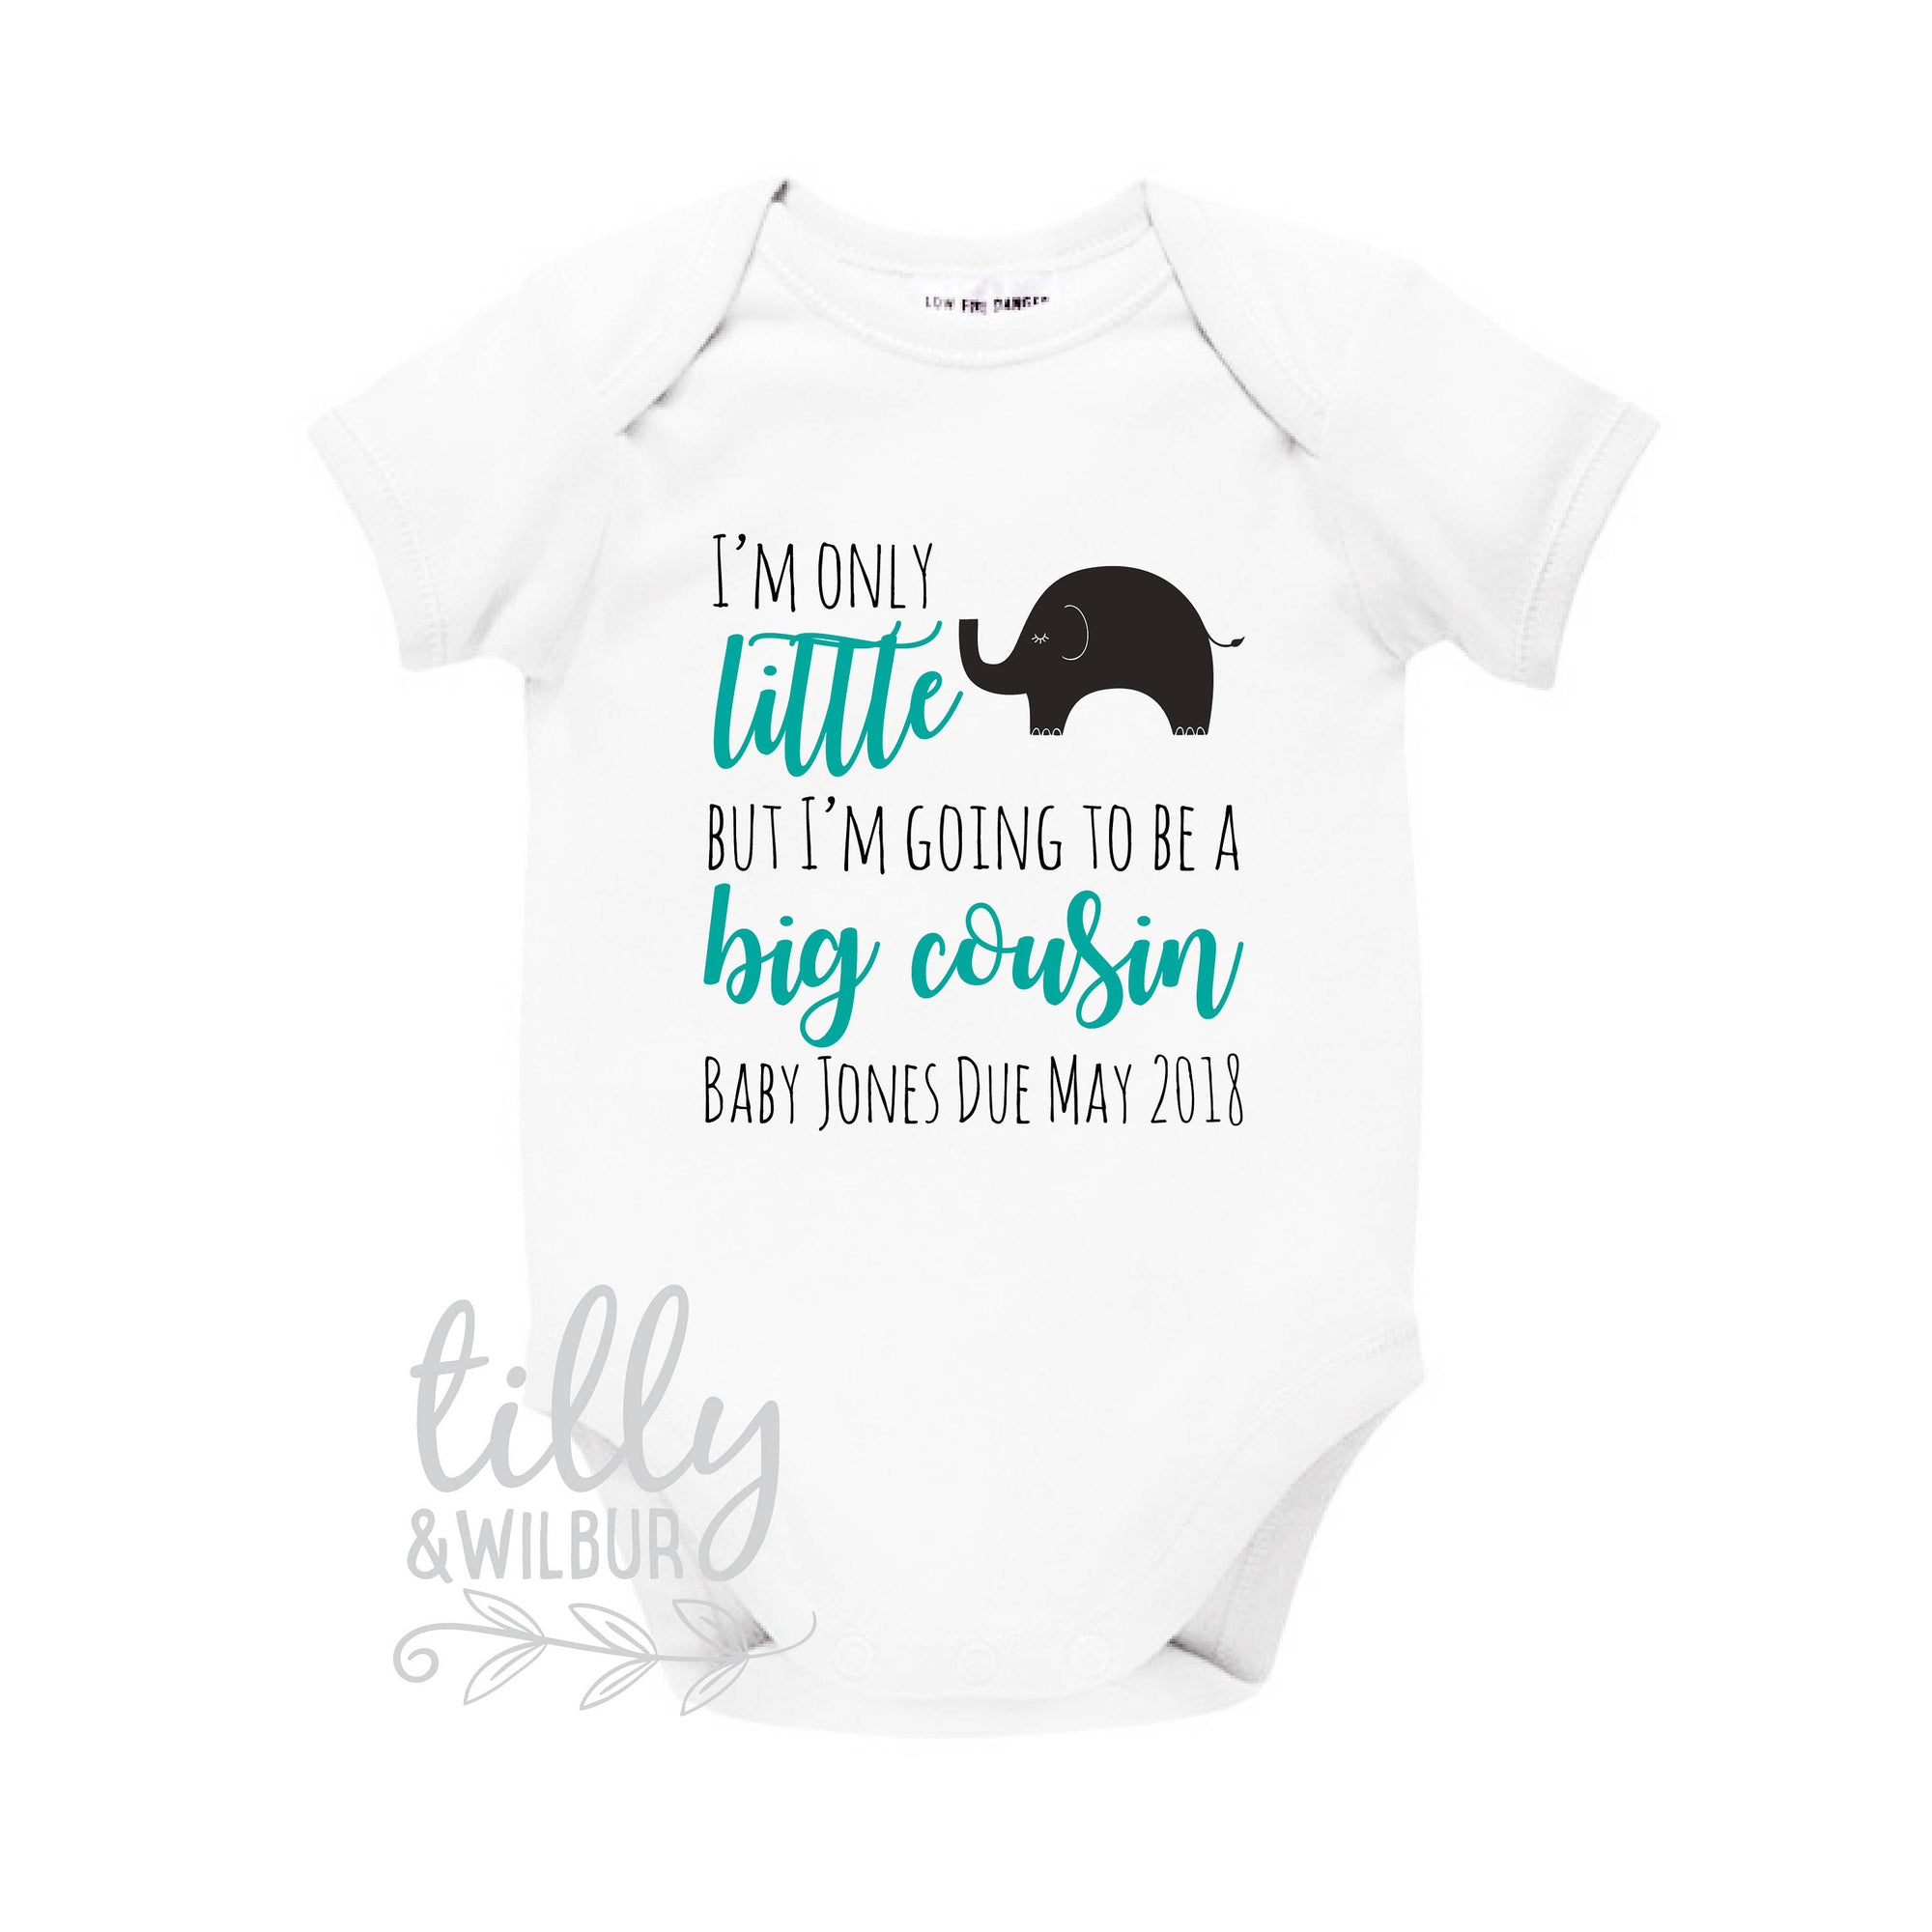 I'm Only Little But I'm Going To Be A Big Cousin Baby Bodysuit, Personalised Cousin Shirt, Baby Cousin Outfit, Cousin Gift, Cousin Shirt